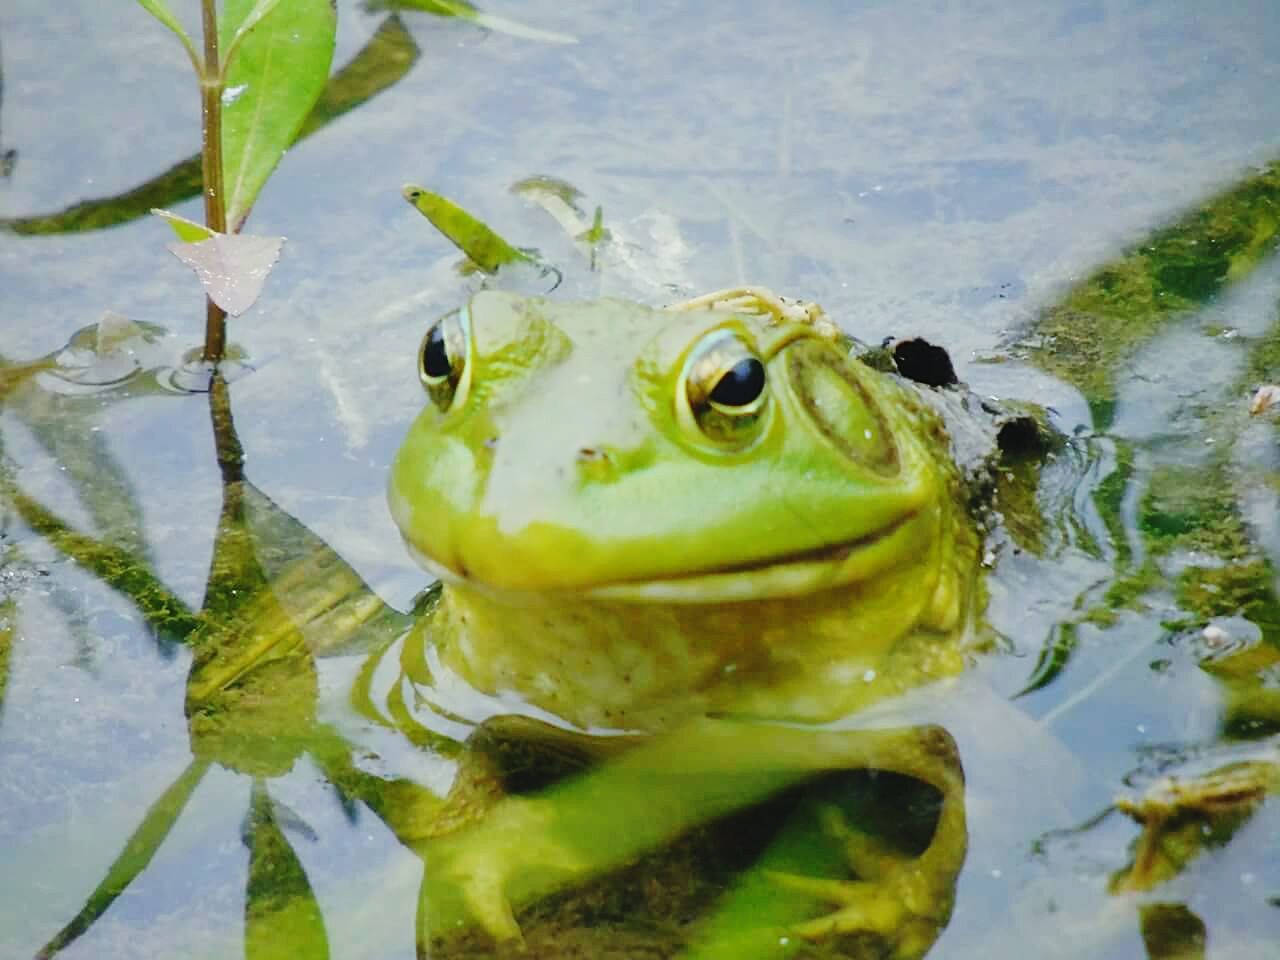 CLOSE-UP PORTRAIT OF A FROG IN LAKE